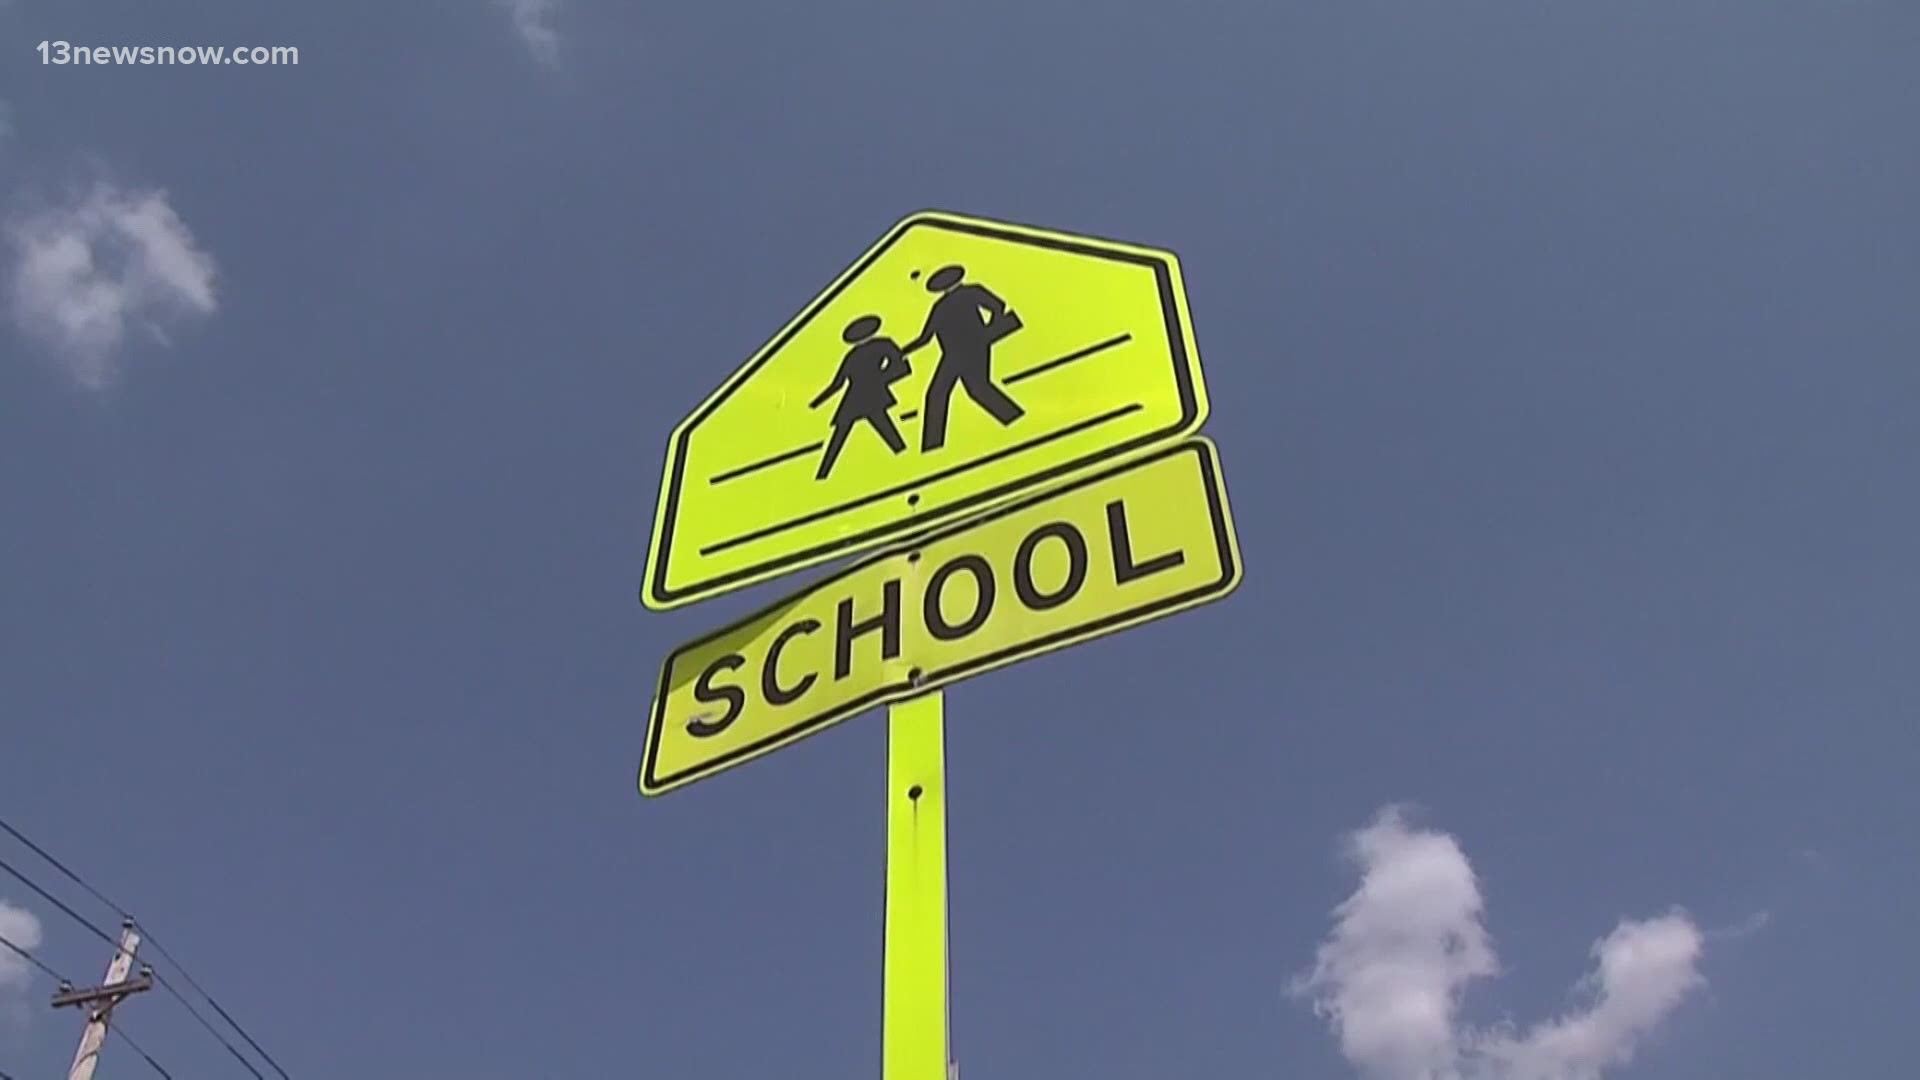 We're getting a closer look at school reopening plans in Newport News. Nothing's official yet, but it gives us an idea of where things stand with the division.